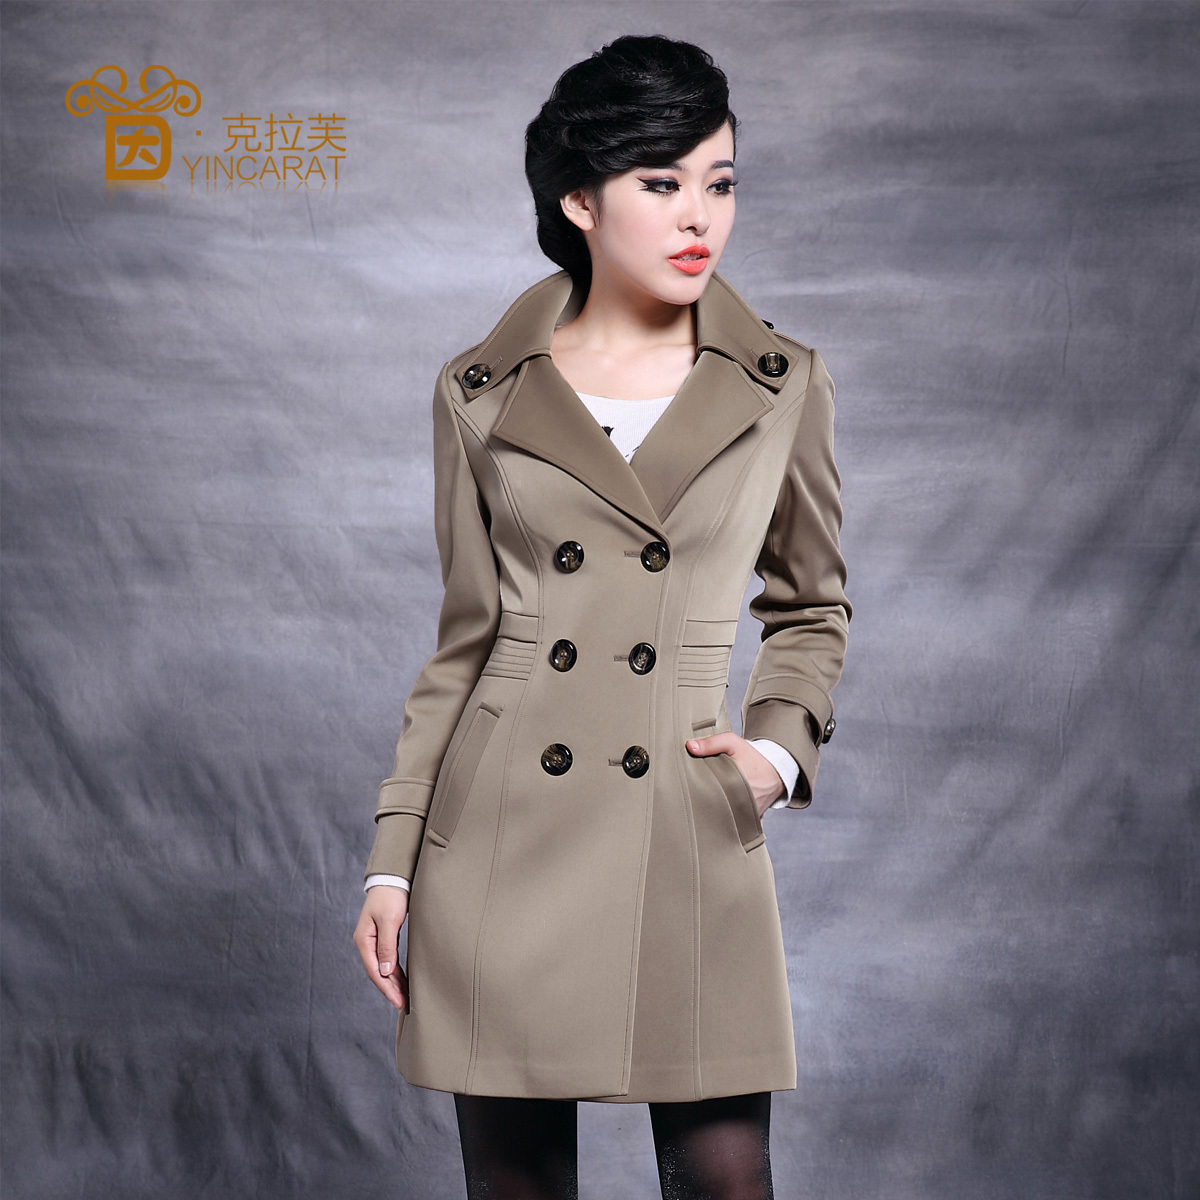 2012 new arrival medium-long slim thickening women's fashion trench outerwear 3888 W20